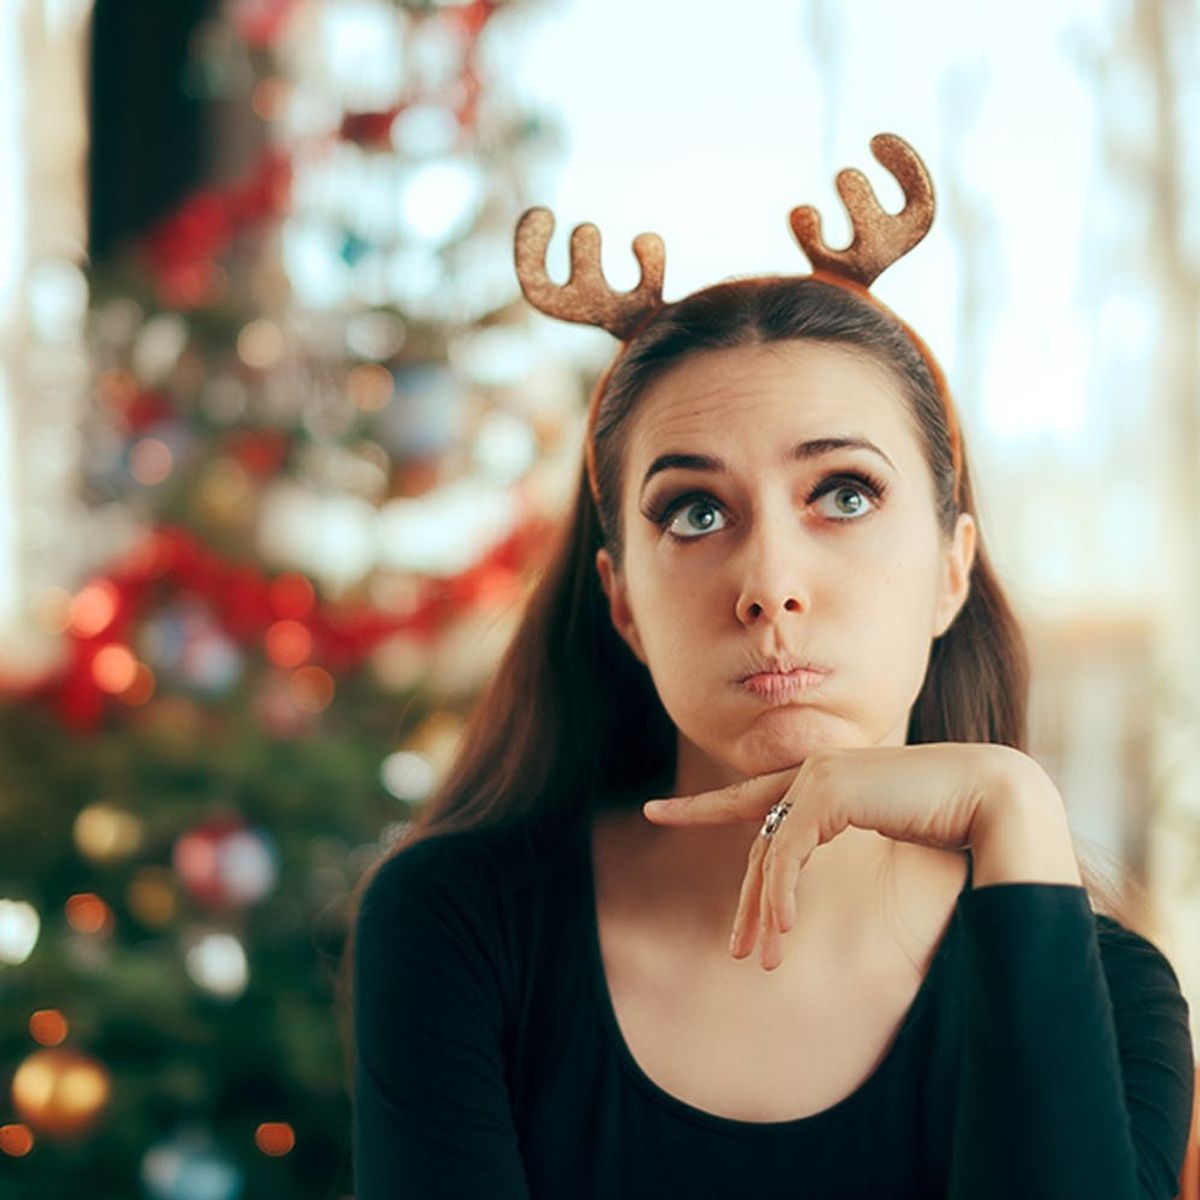 How to Survive Your Work Holiday Party While Pregnant